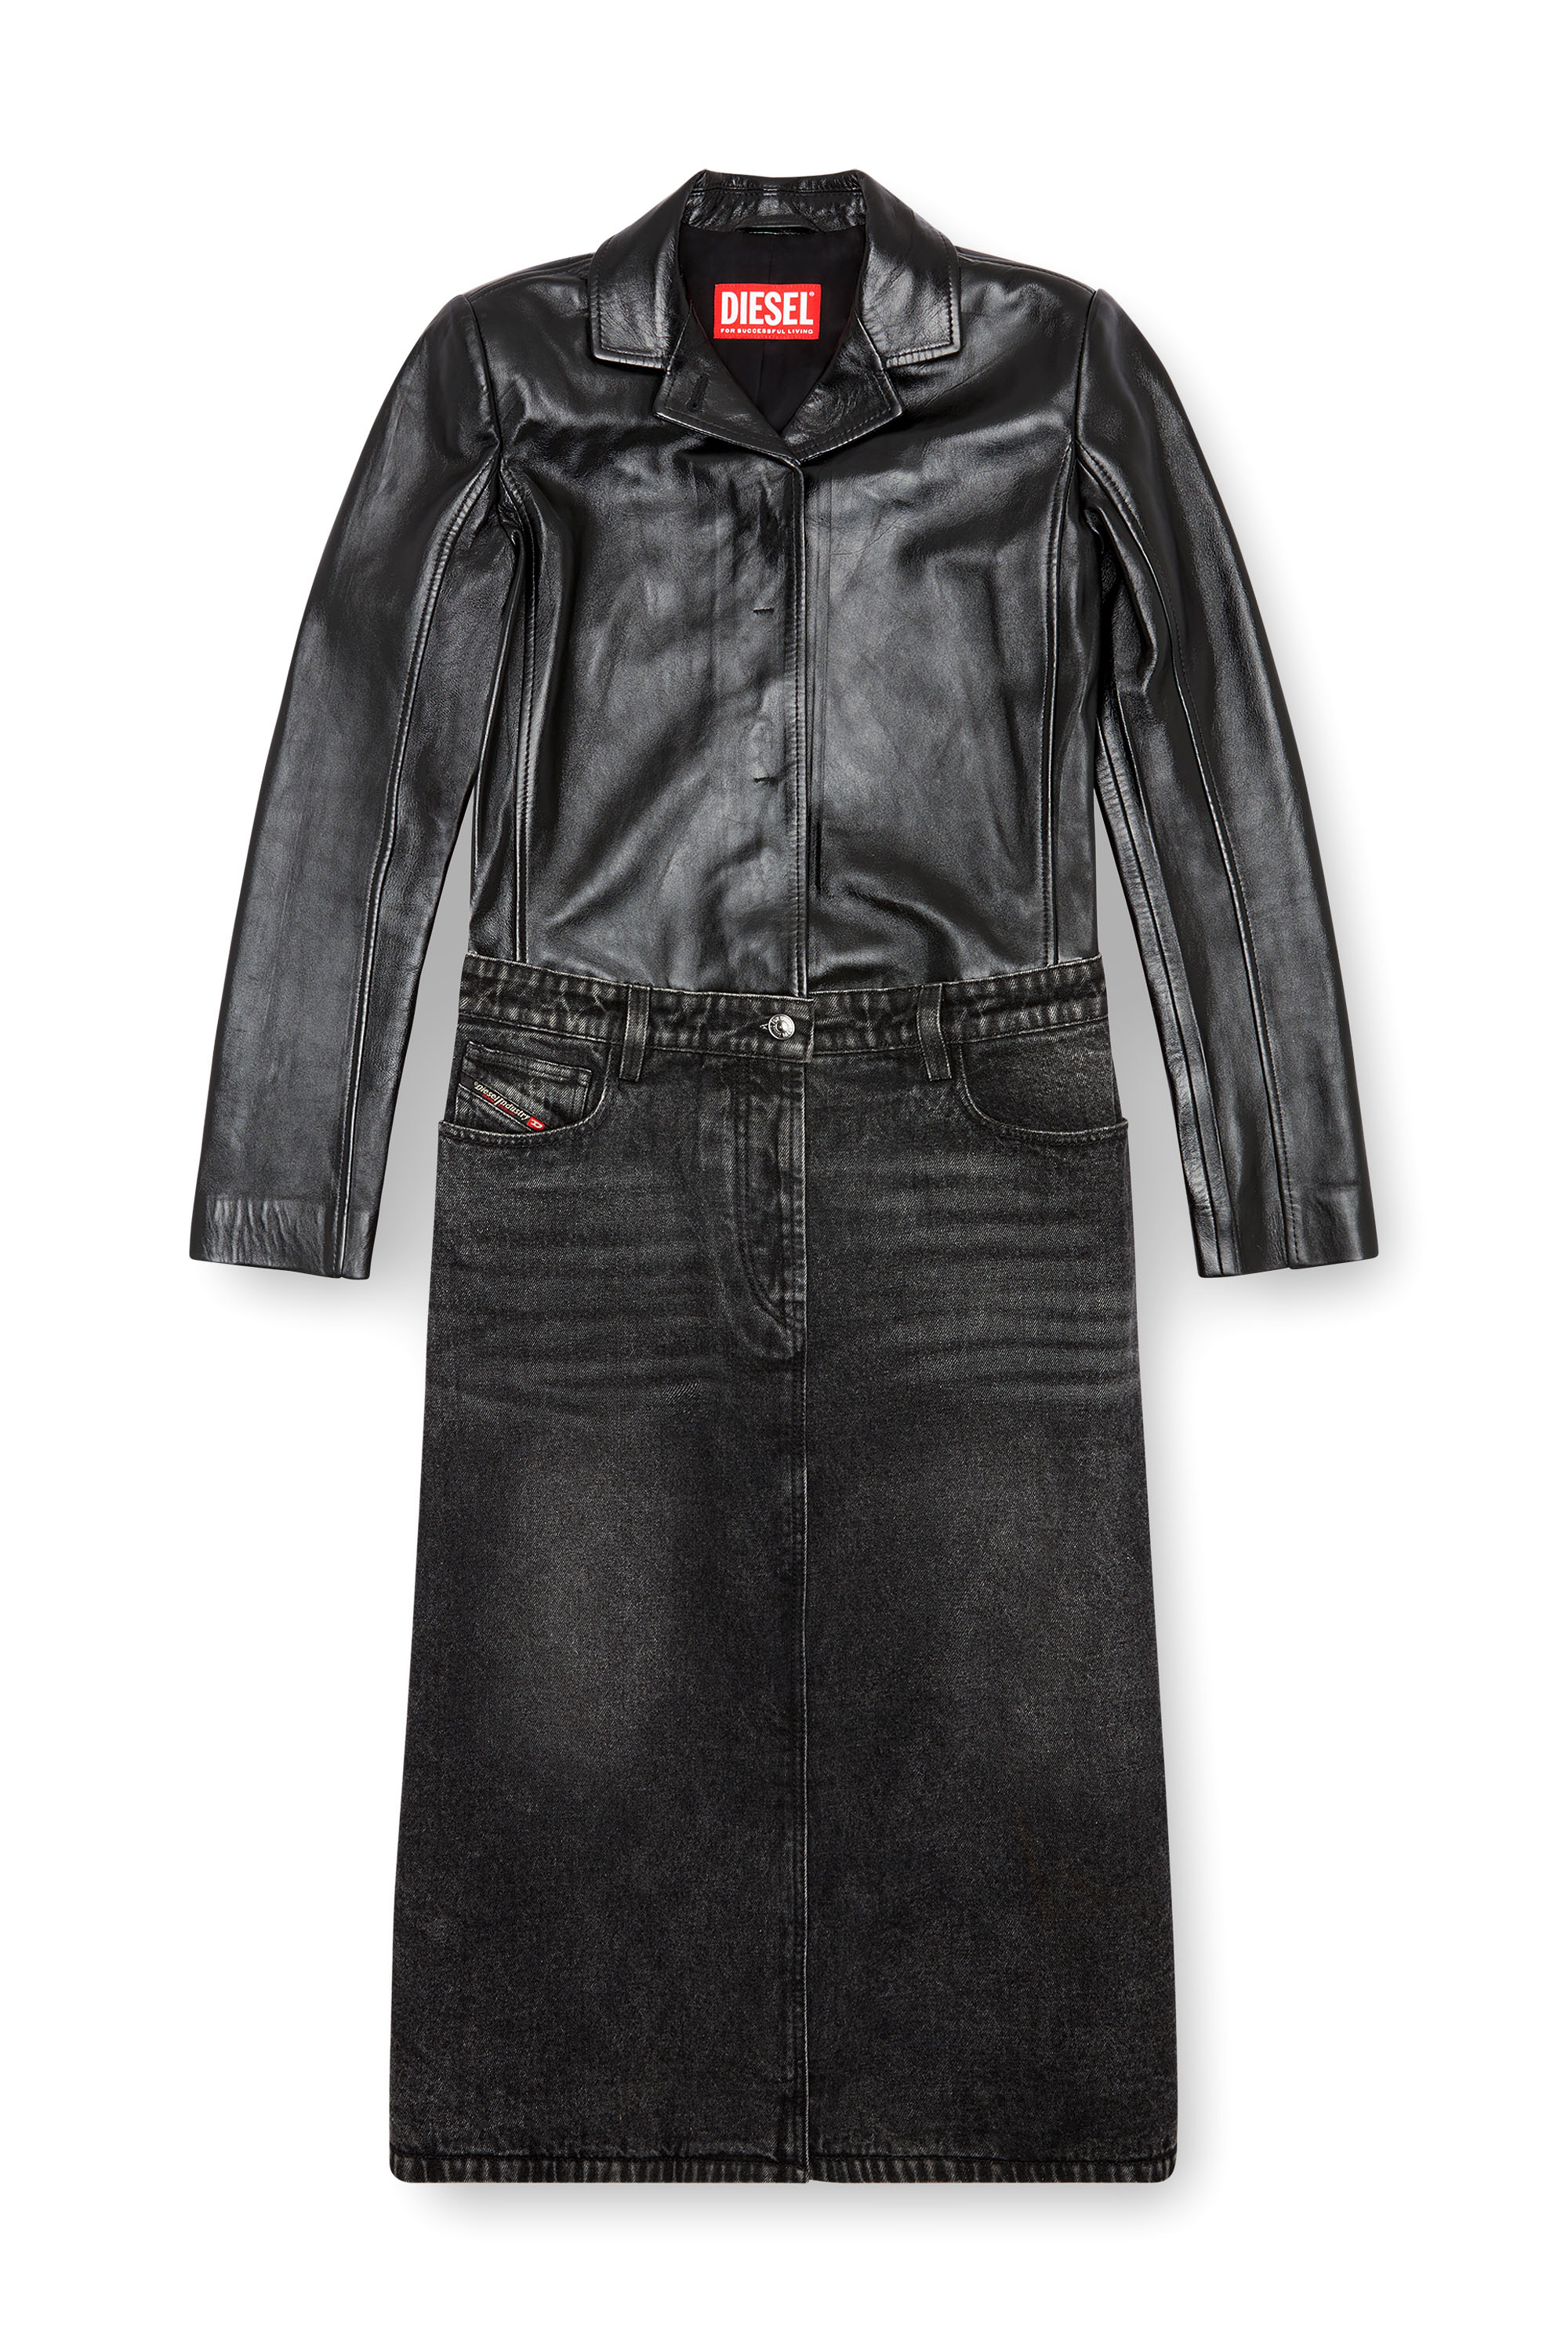 Diesel - L-ORY, Female Hybrid coat in denim and leather in ブラック - Image 3